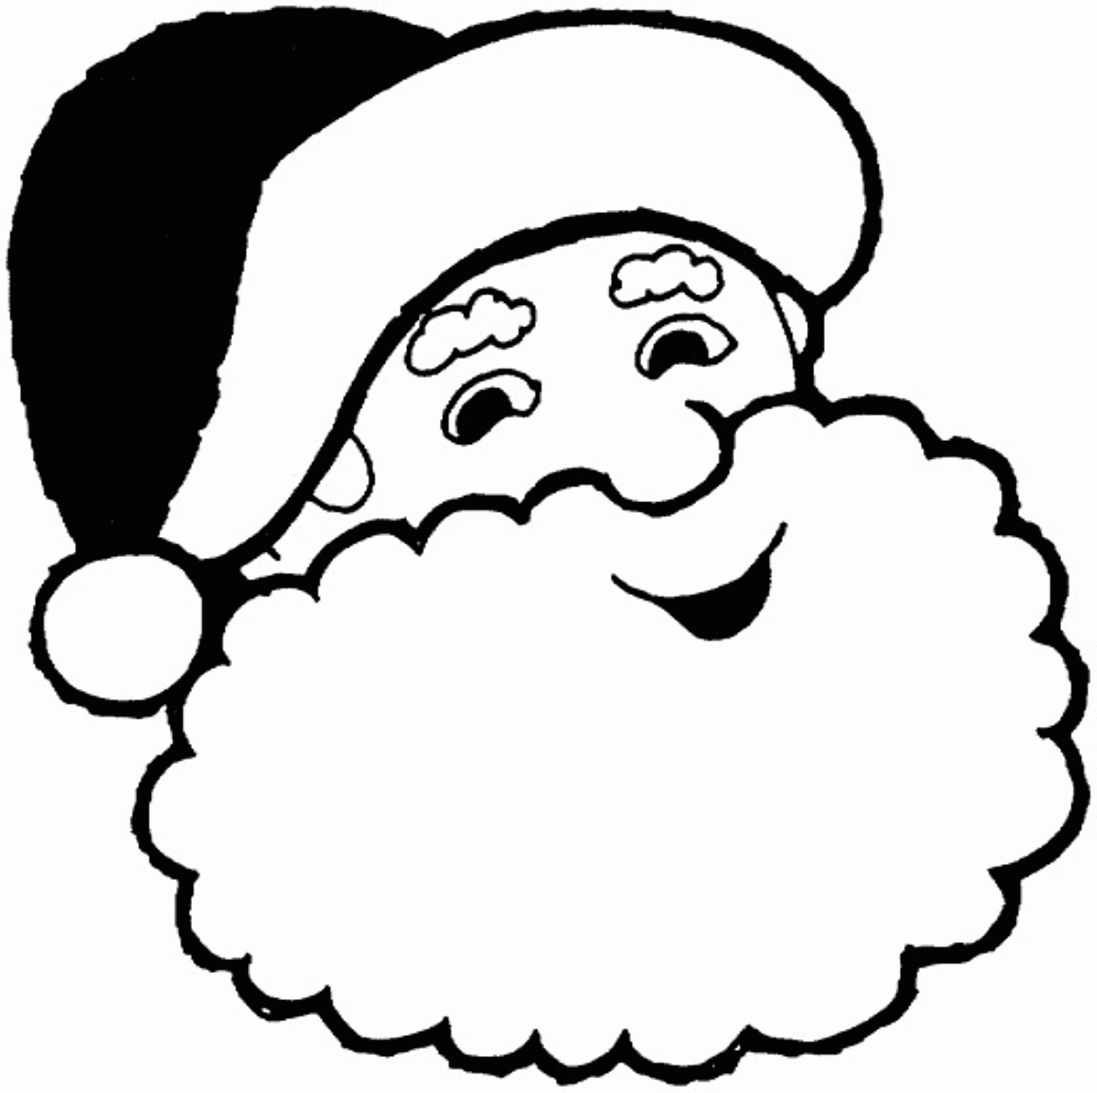 Smiling Santa Claus Coloring Pages | Christmas Coloring pages of ...